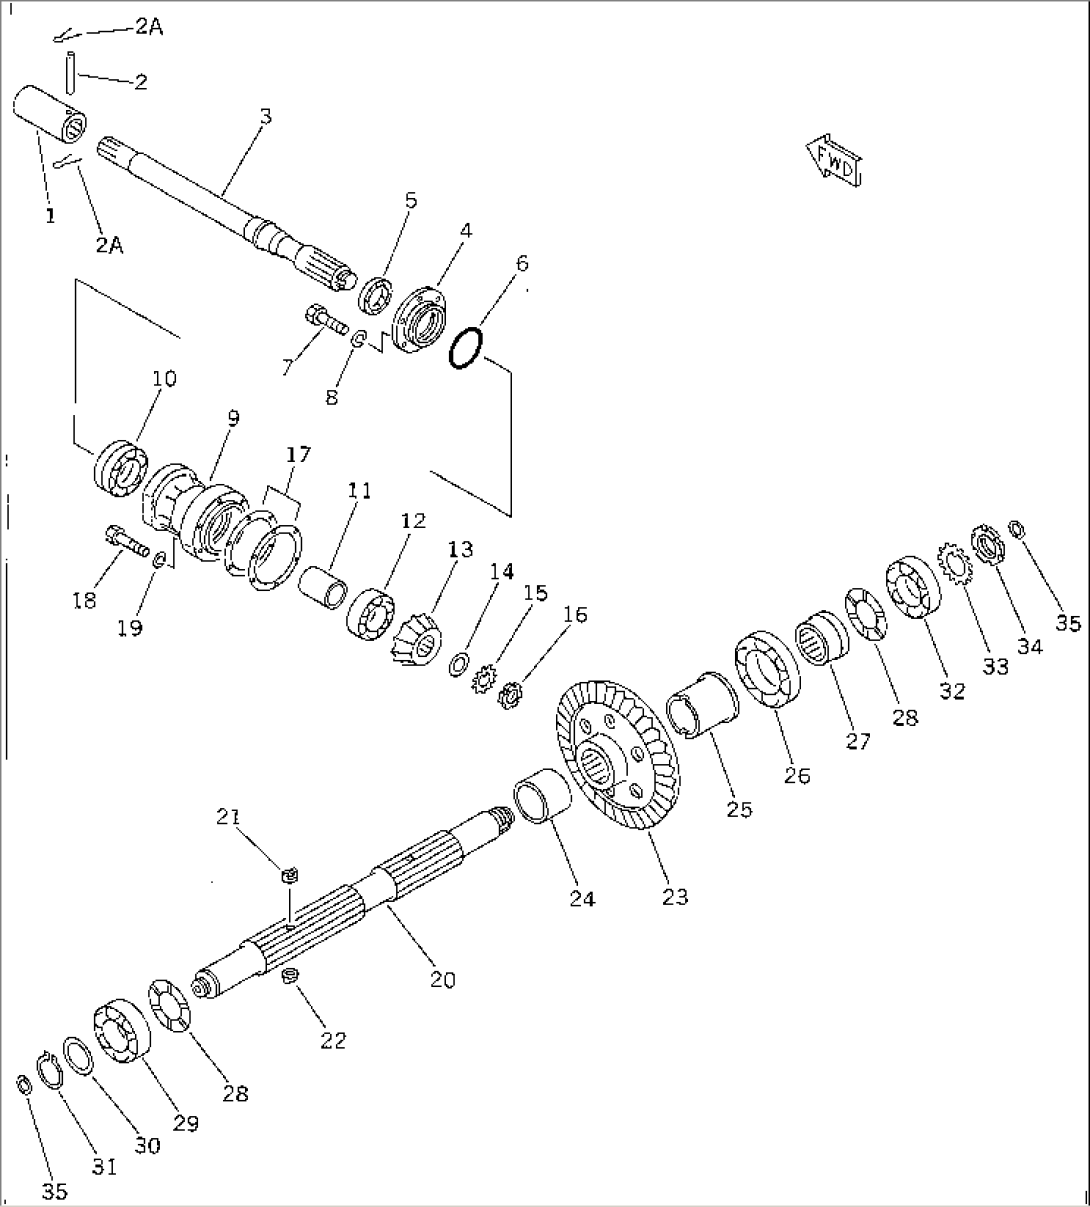 INPUT SHAFT AND BEVEL GEAR (FOR TOWING WINCH)